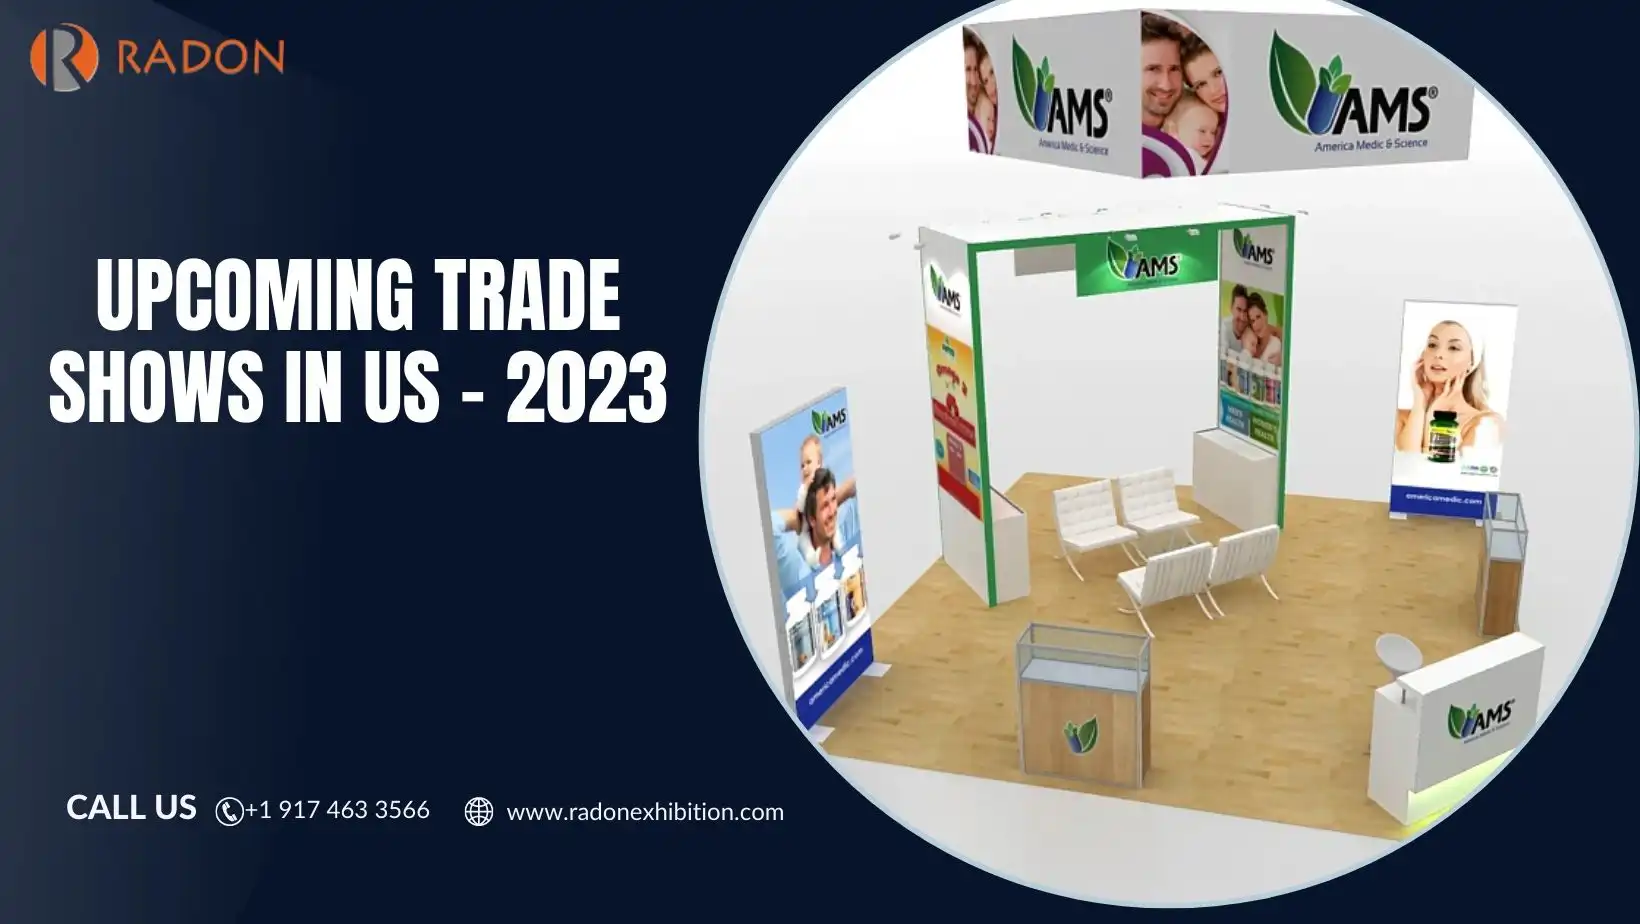 Upcoming trade shows in US